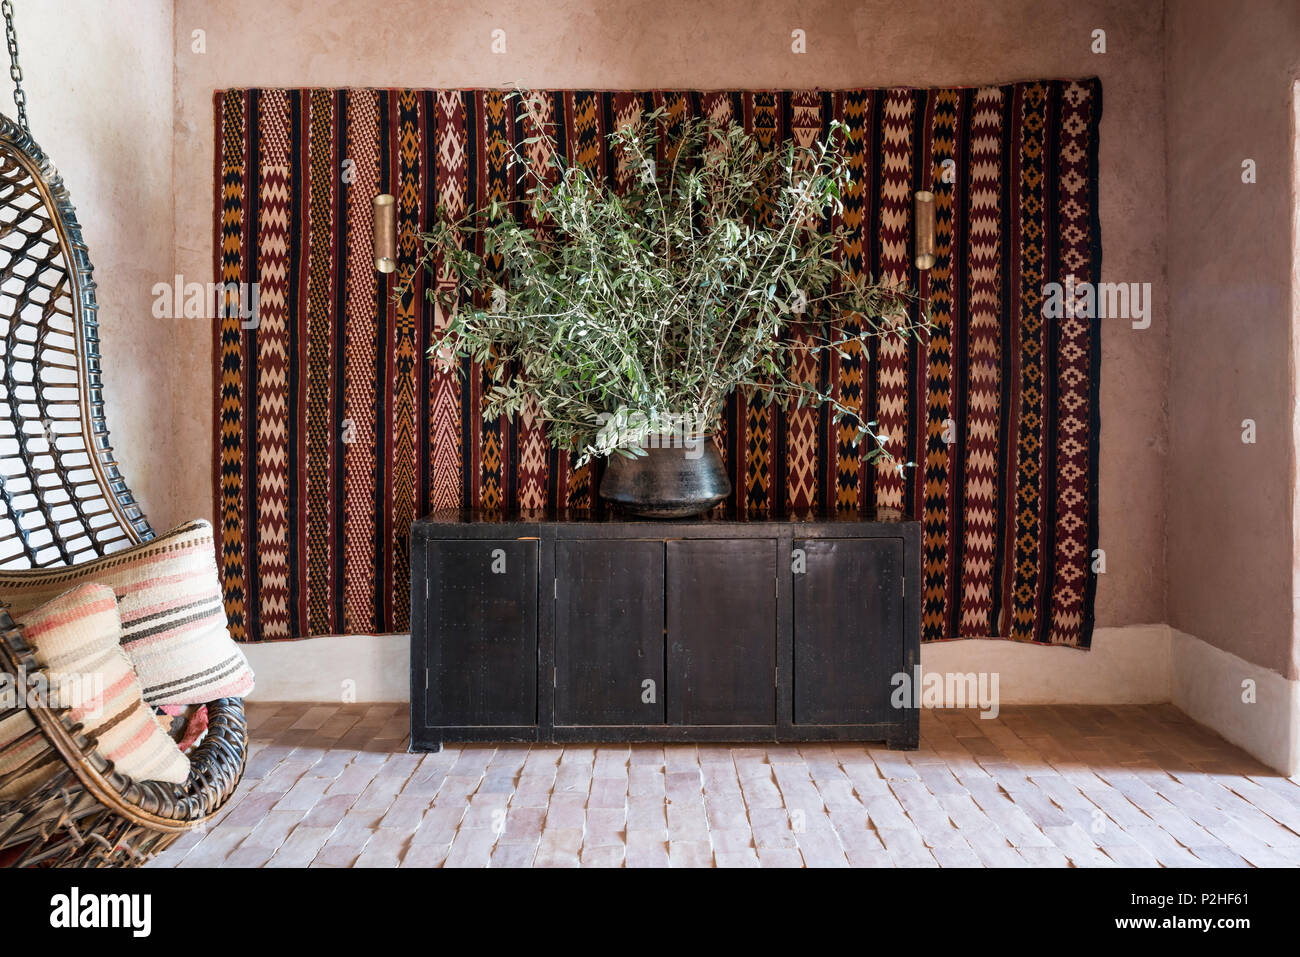 Woven hanging basket chair in room with earth walls, terracotta floor and kilim wall hang Stock Photo